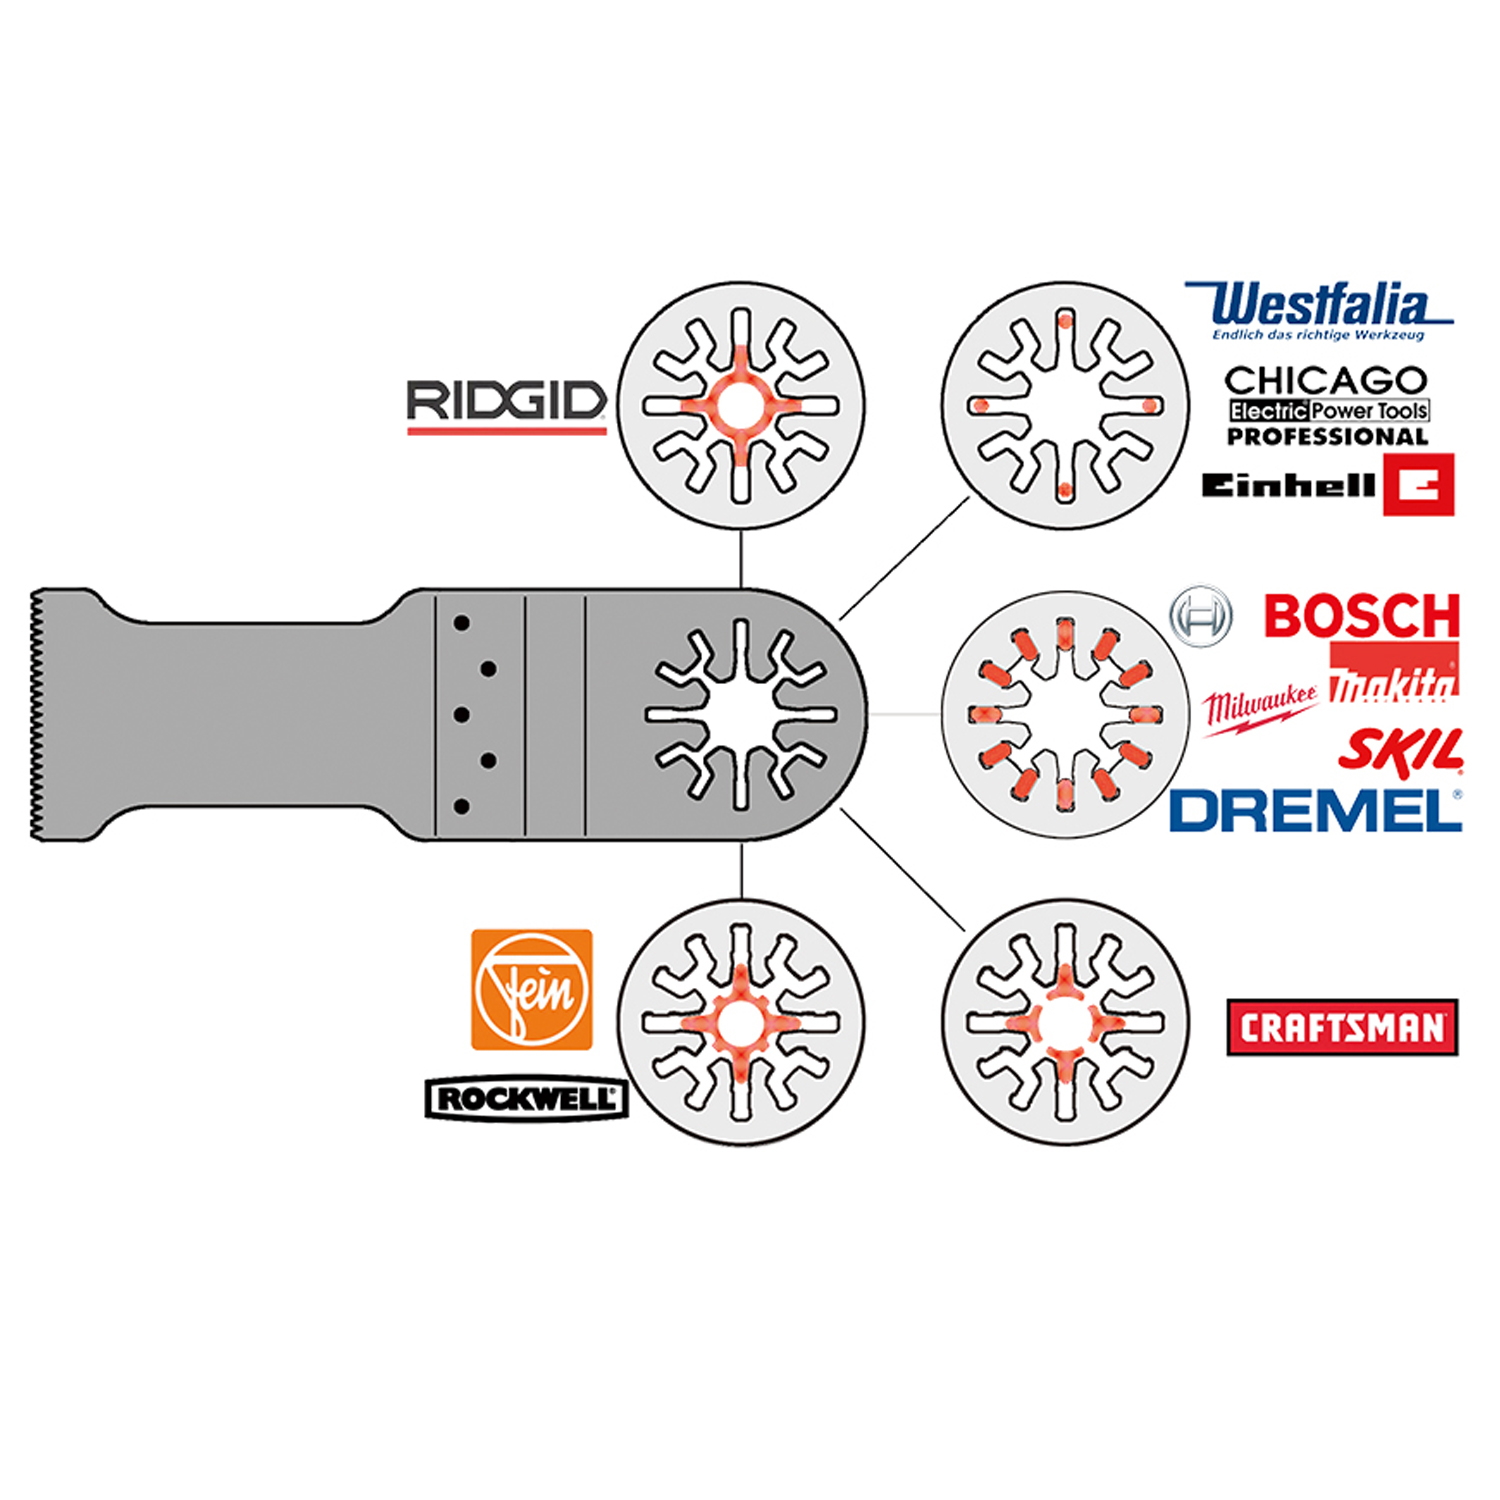 Multi Tool Blade Compatibility Chart